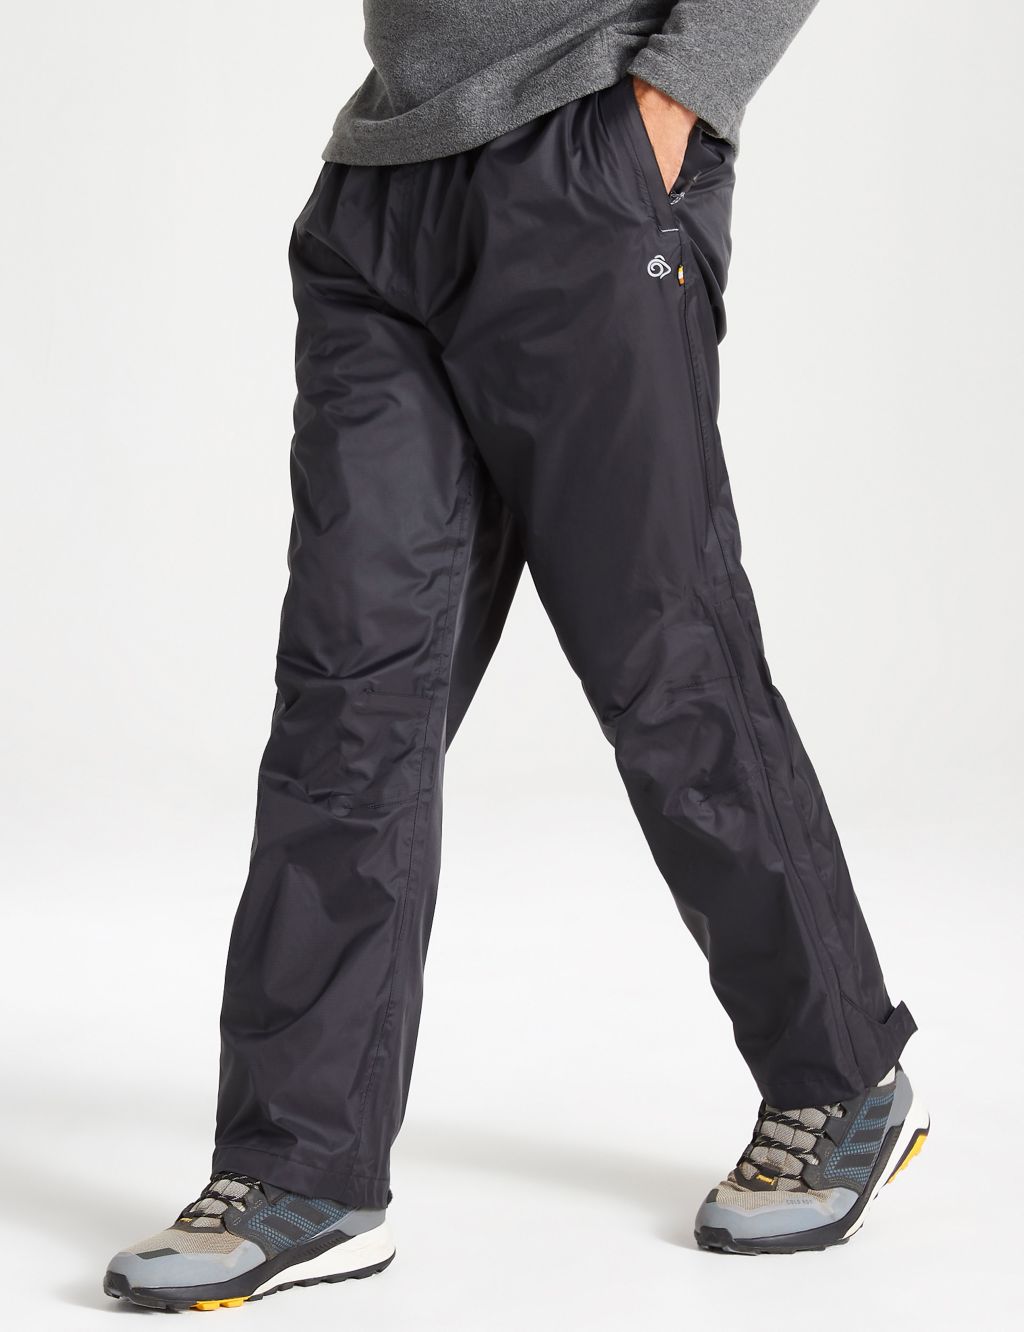 Waterproof Trousers, Overtrousers